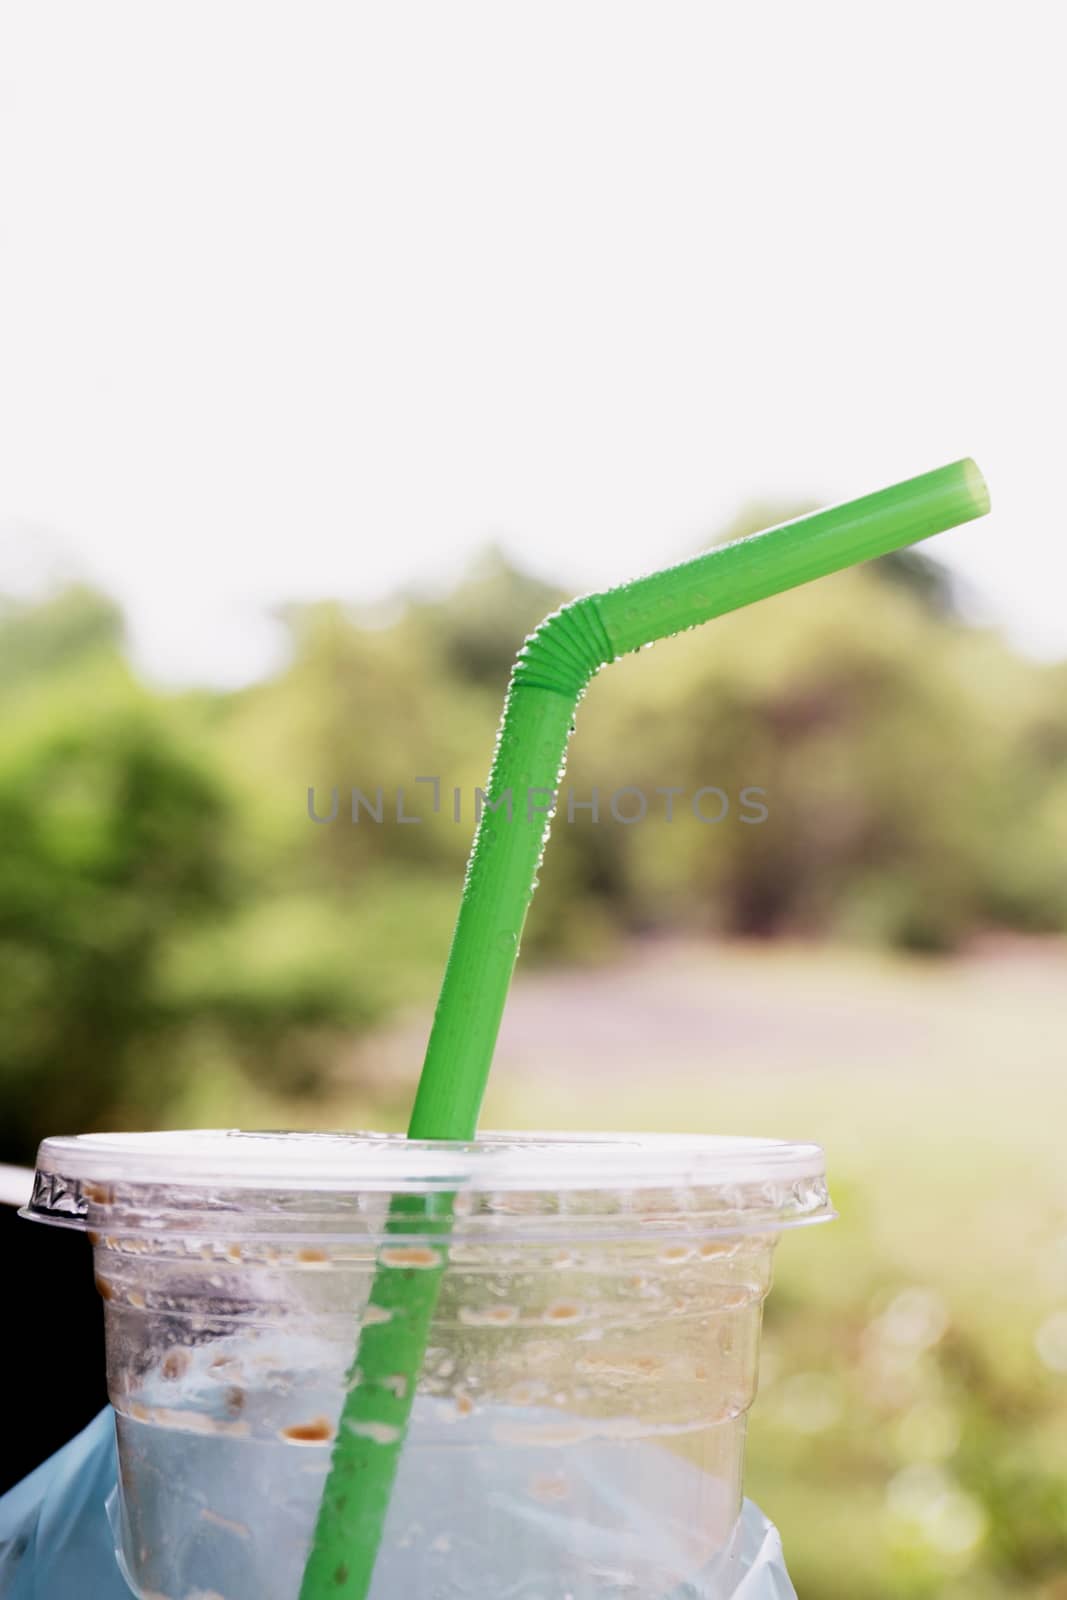 straw green tube refreshed with condensation of water ice, fresh lifestyle